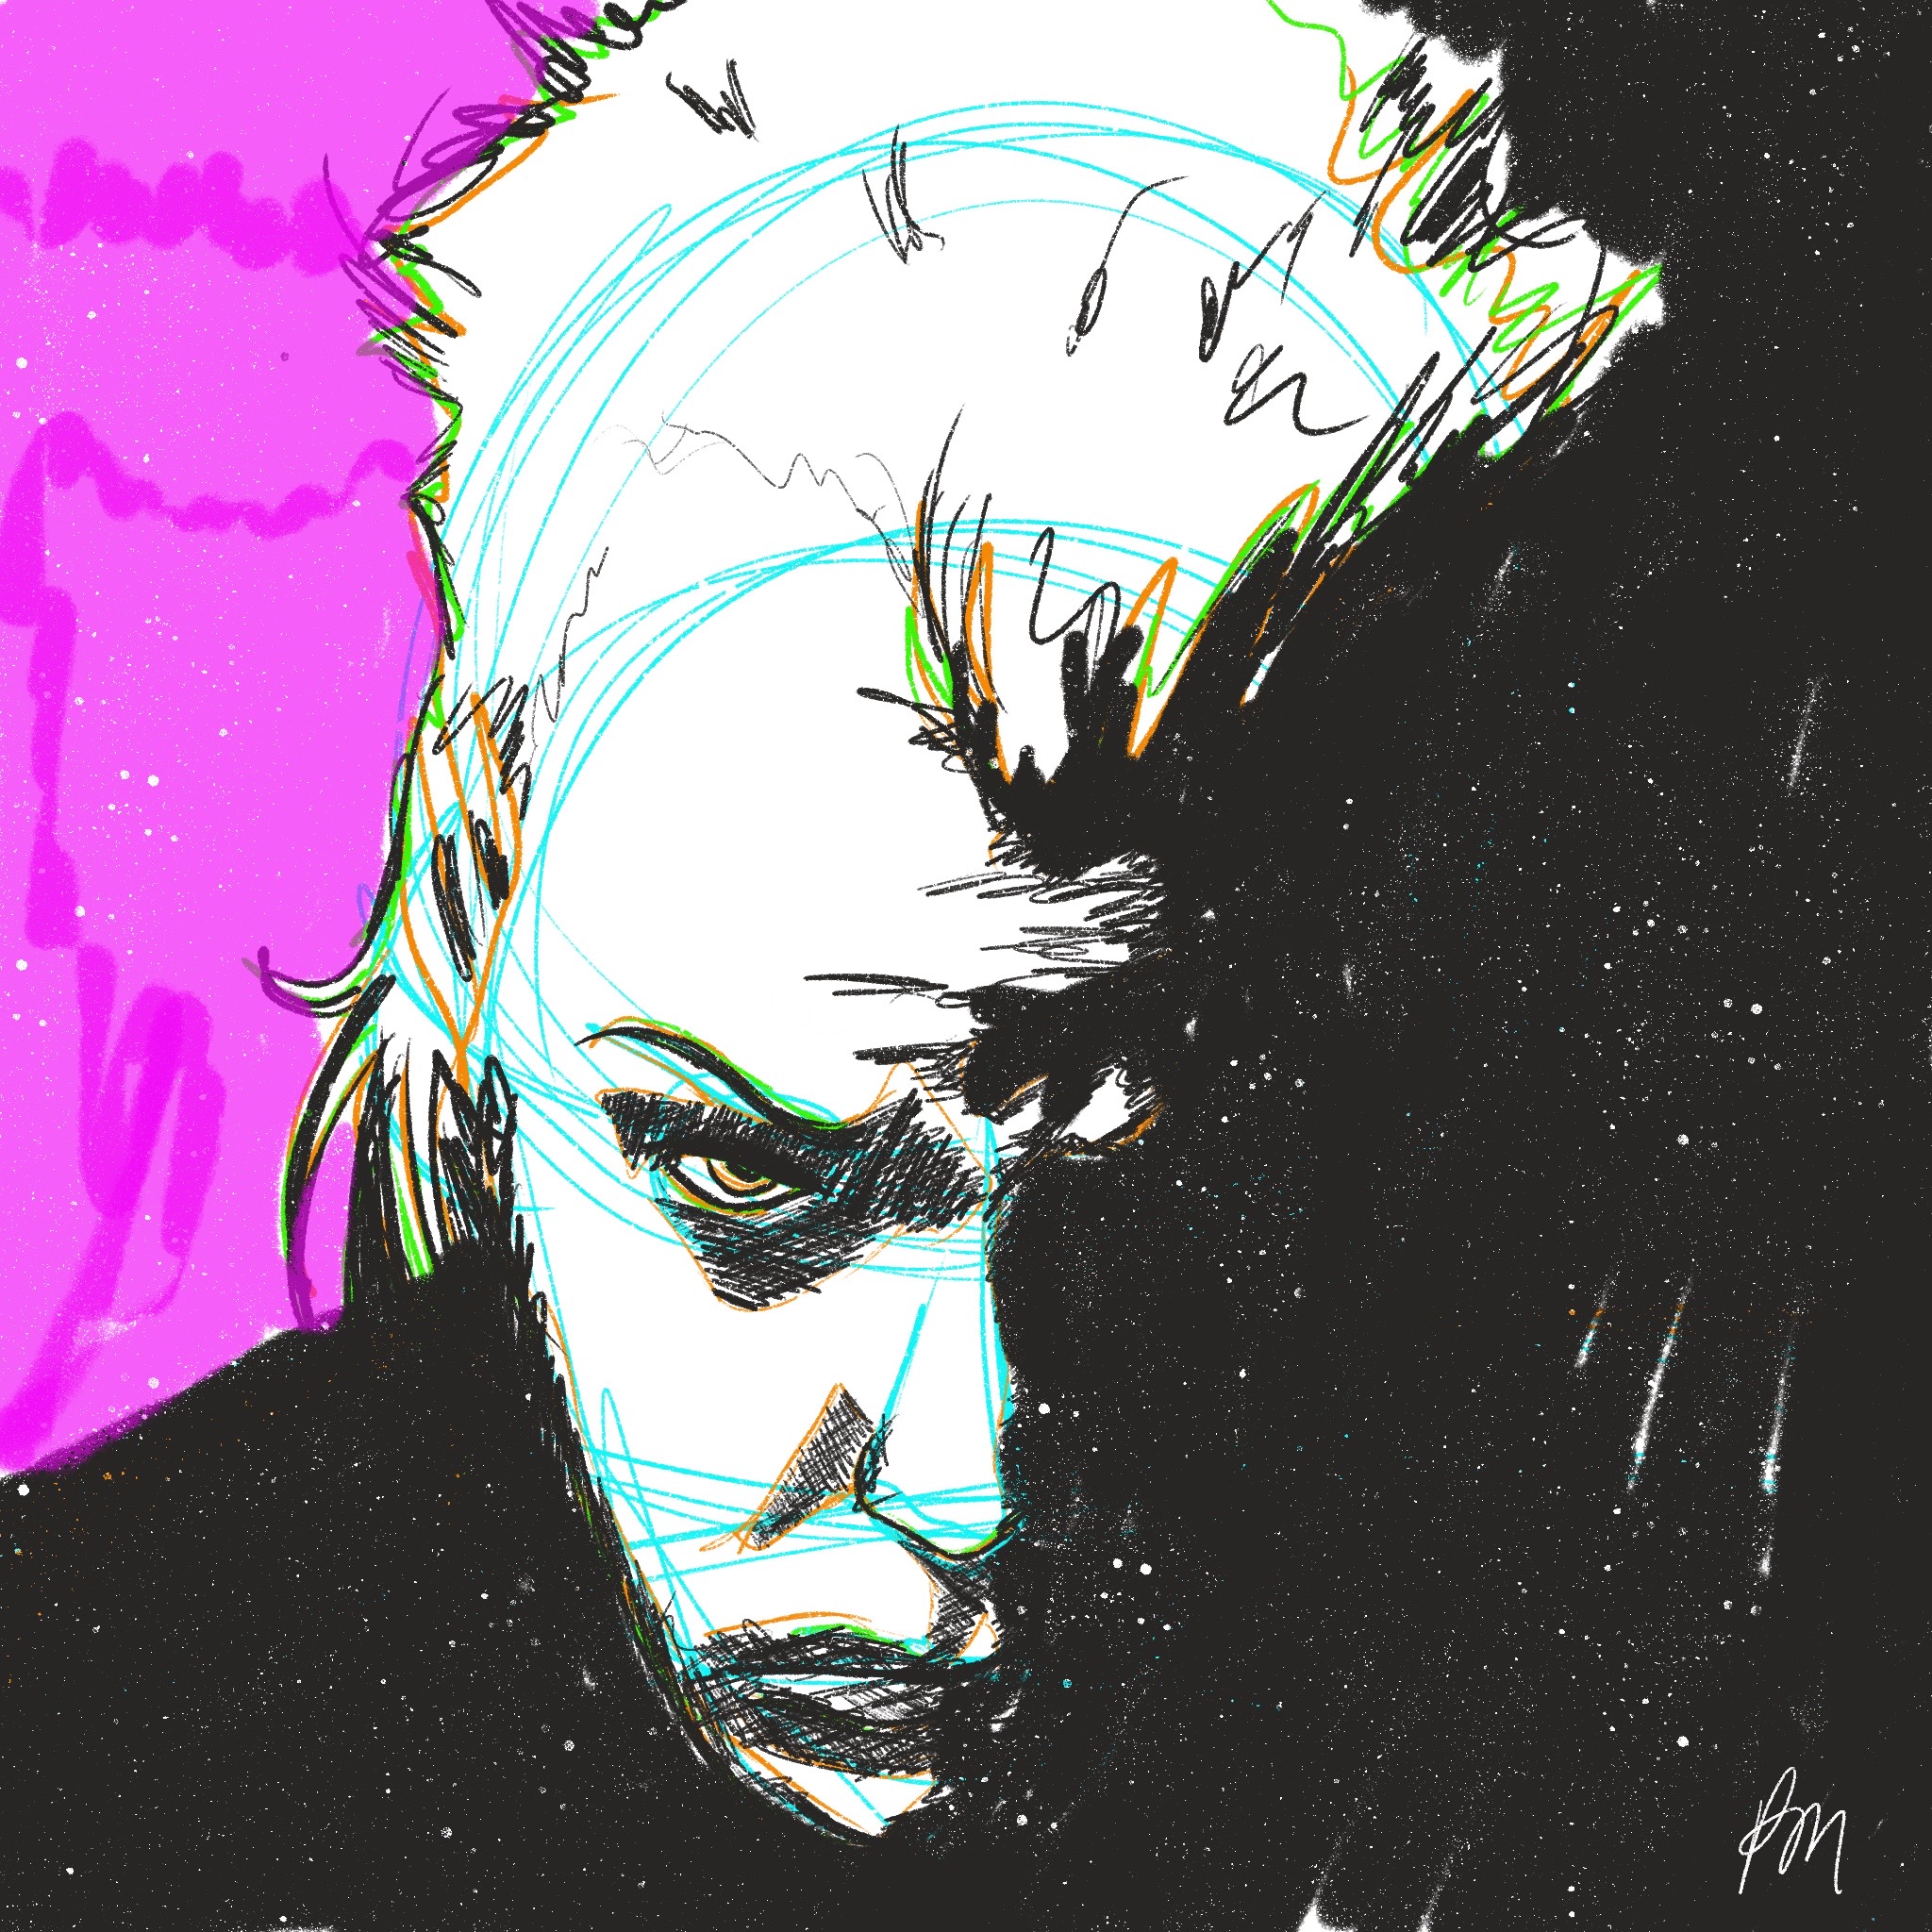 Digital Illustration of Keifer Sutherland based off of the promotional poster for The Lost Boys film from the 1980s